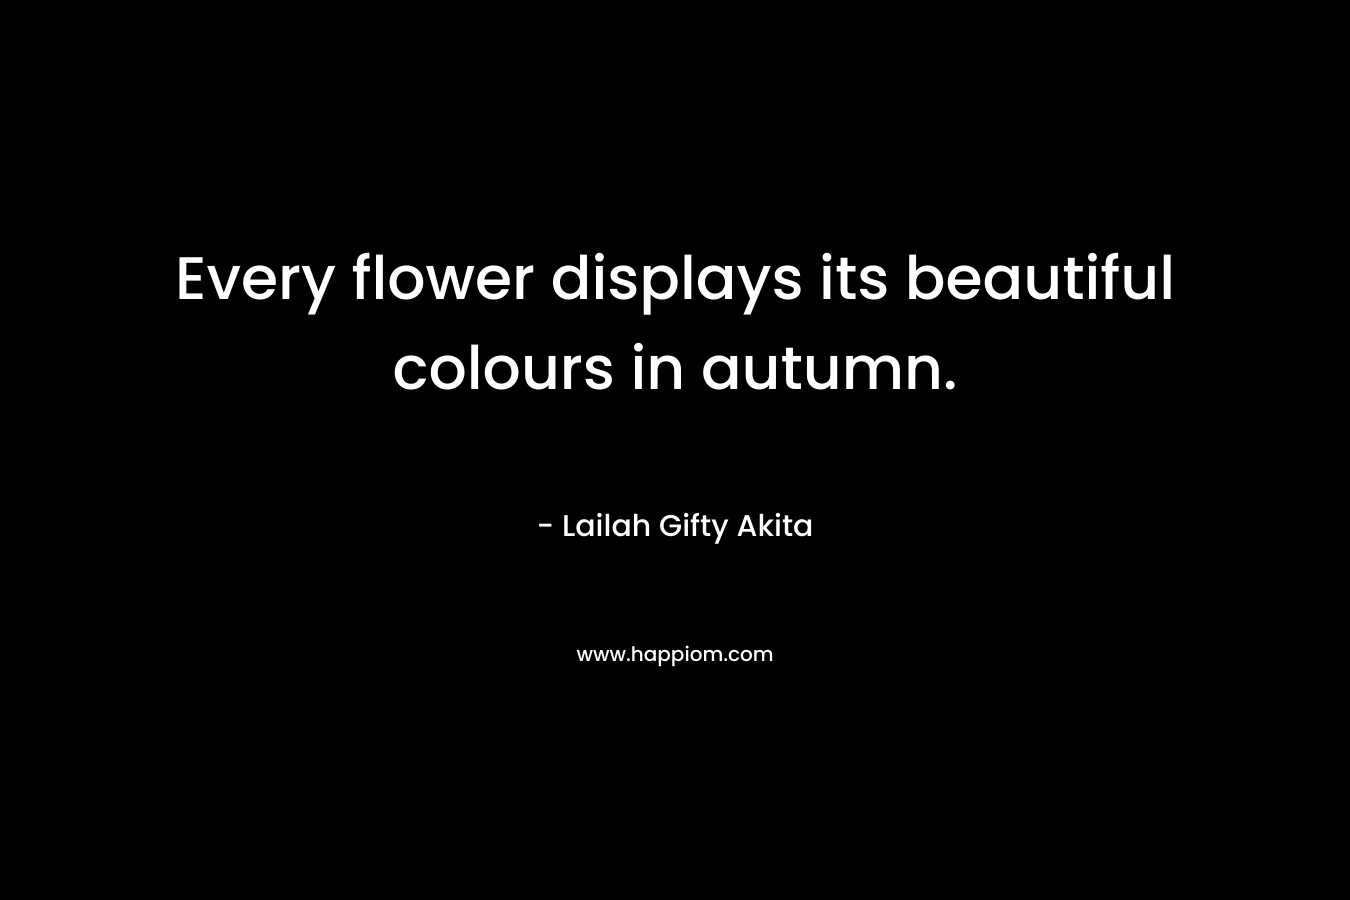 Every flower displays its beautiful colours in autumn. – Lailah Gifty Akita